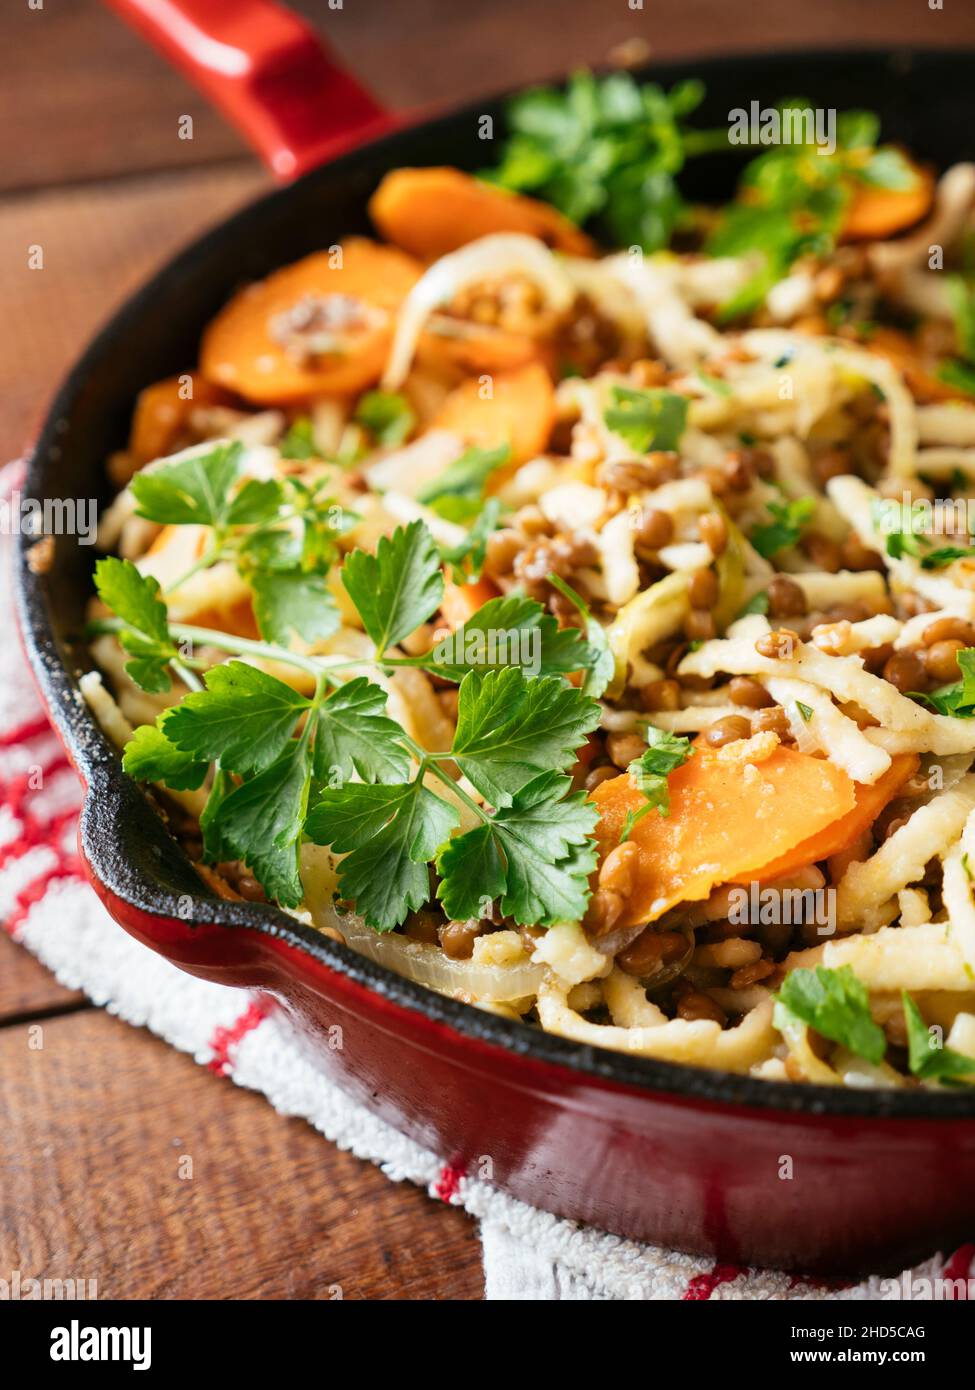 Carrots and Lentils with German Pasta (Spaetzle) in a cast iron pan Stock Photo